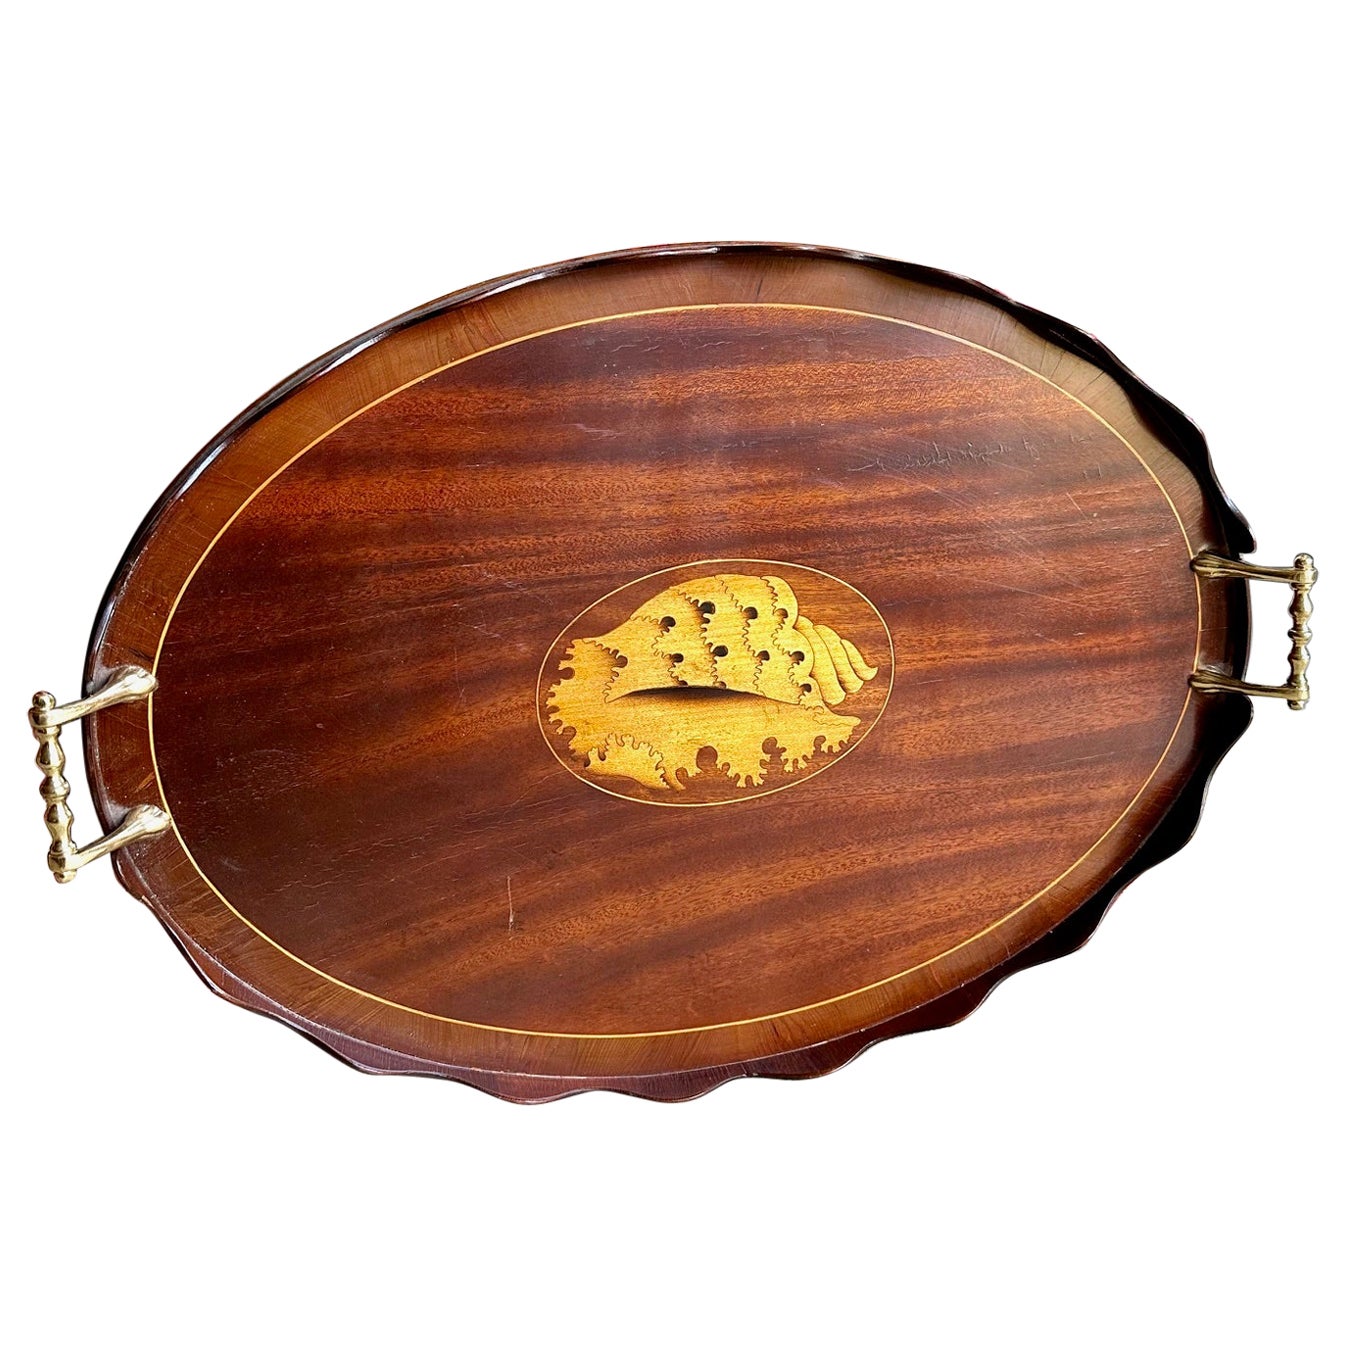 19th Century European Inlaid Tray with Serpentine Edge and Brass Handles For Sale